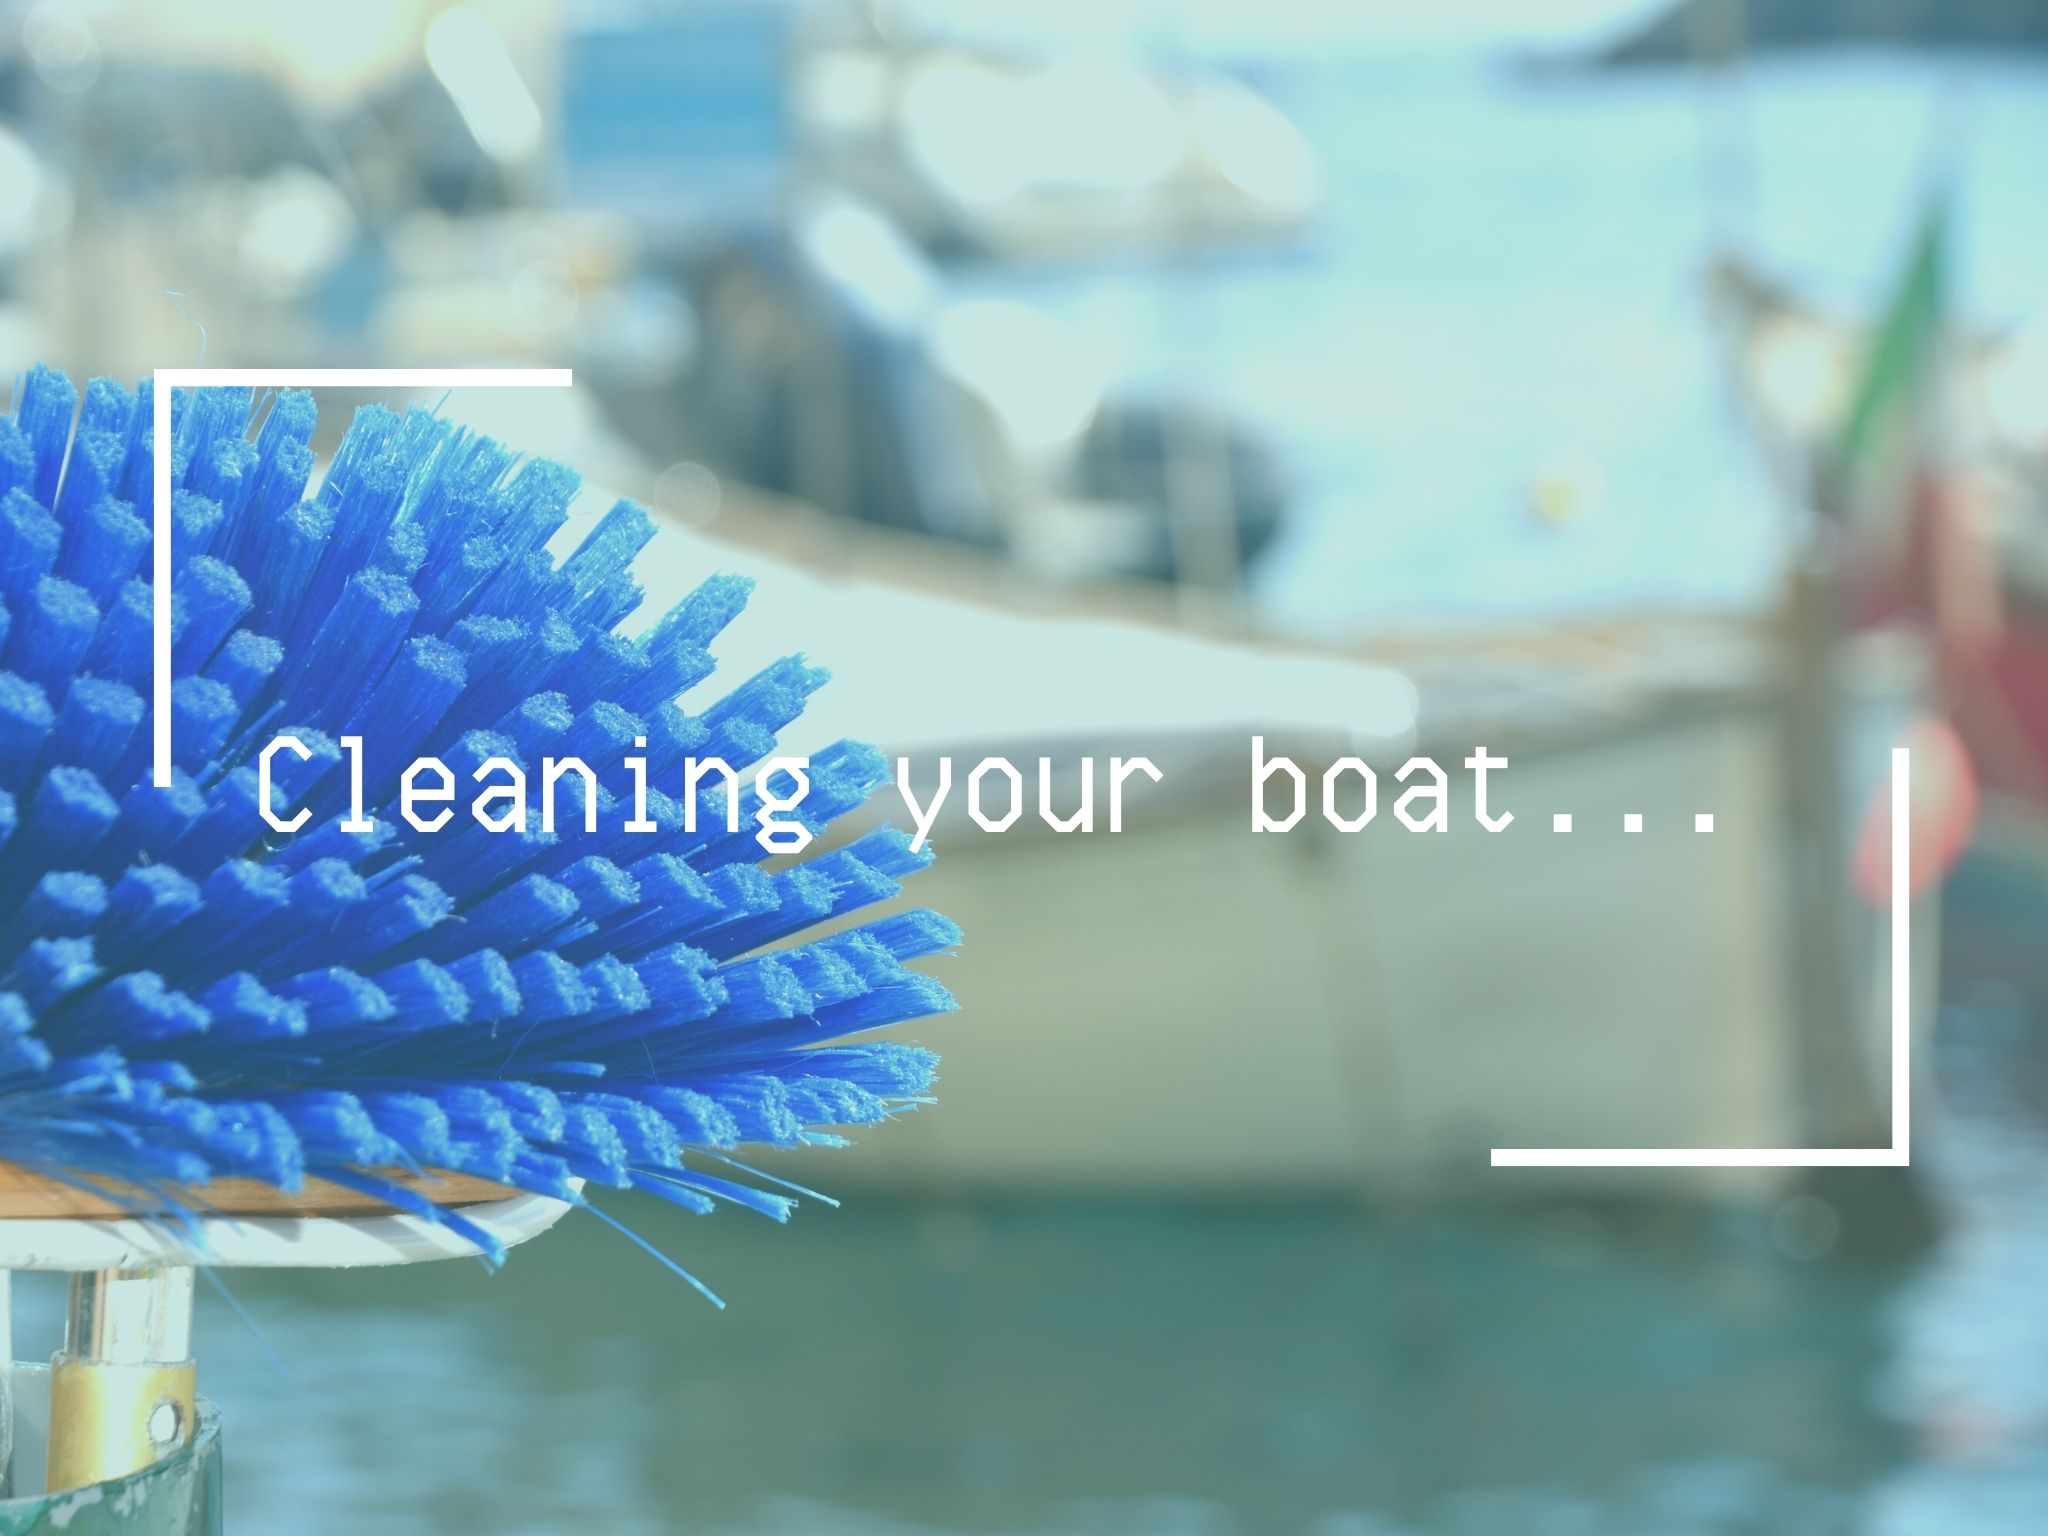 MS Nautic Solutions: How to clean your boat